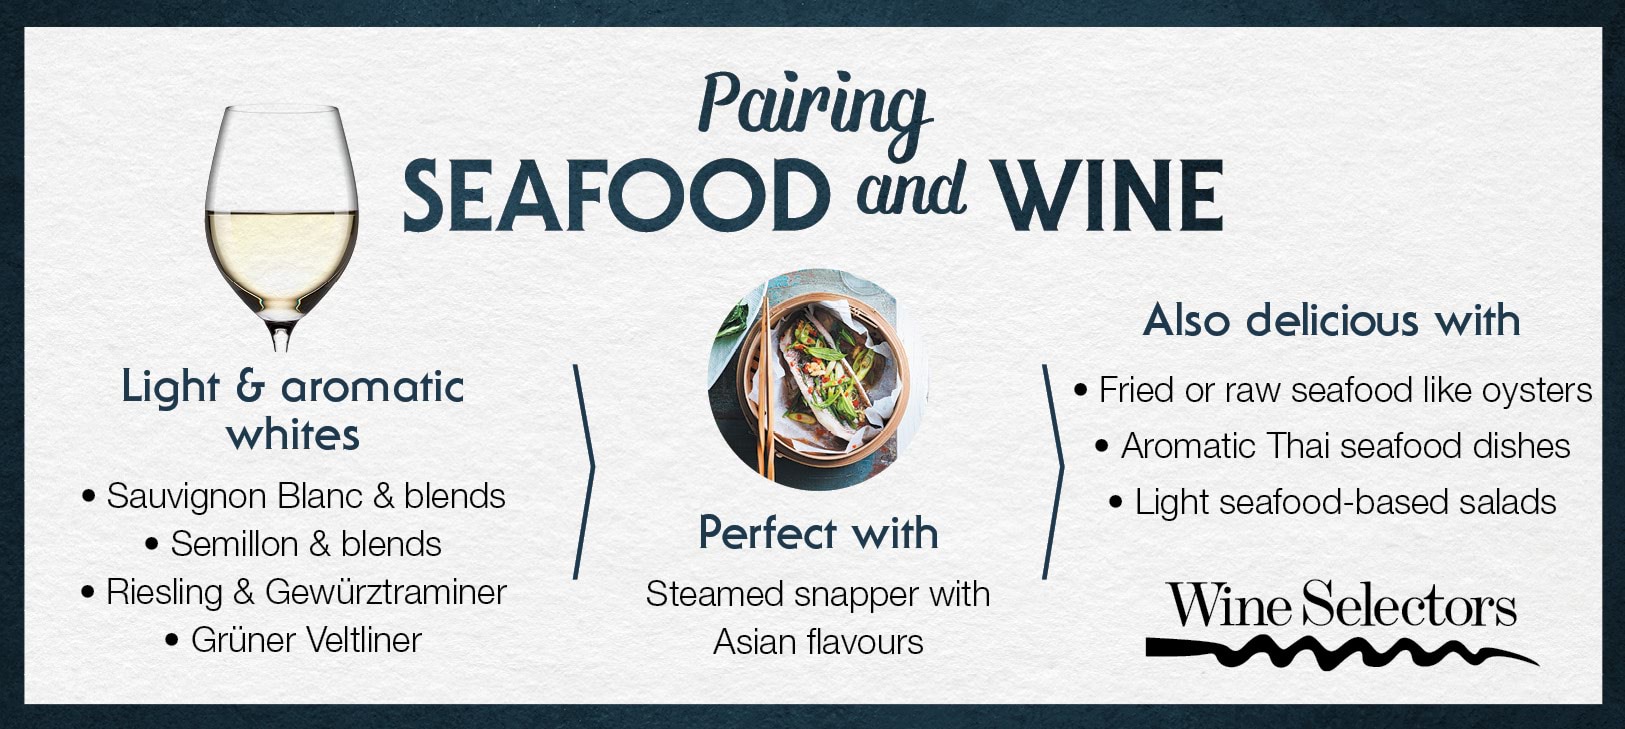 Light and aromatic wines pair well with snapper and Asian flavours - infographic